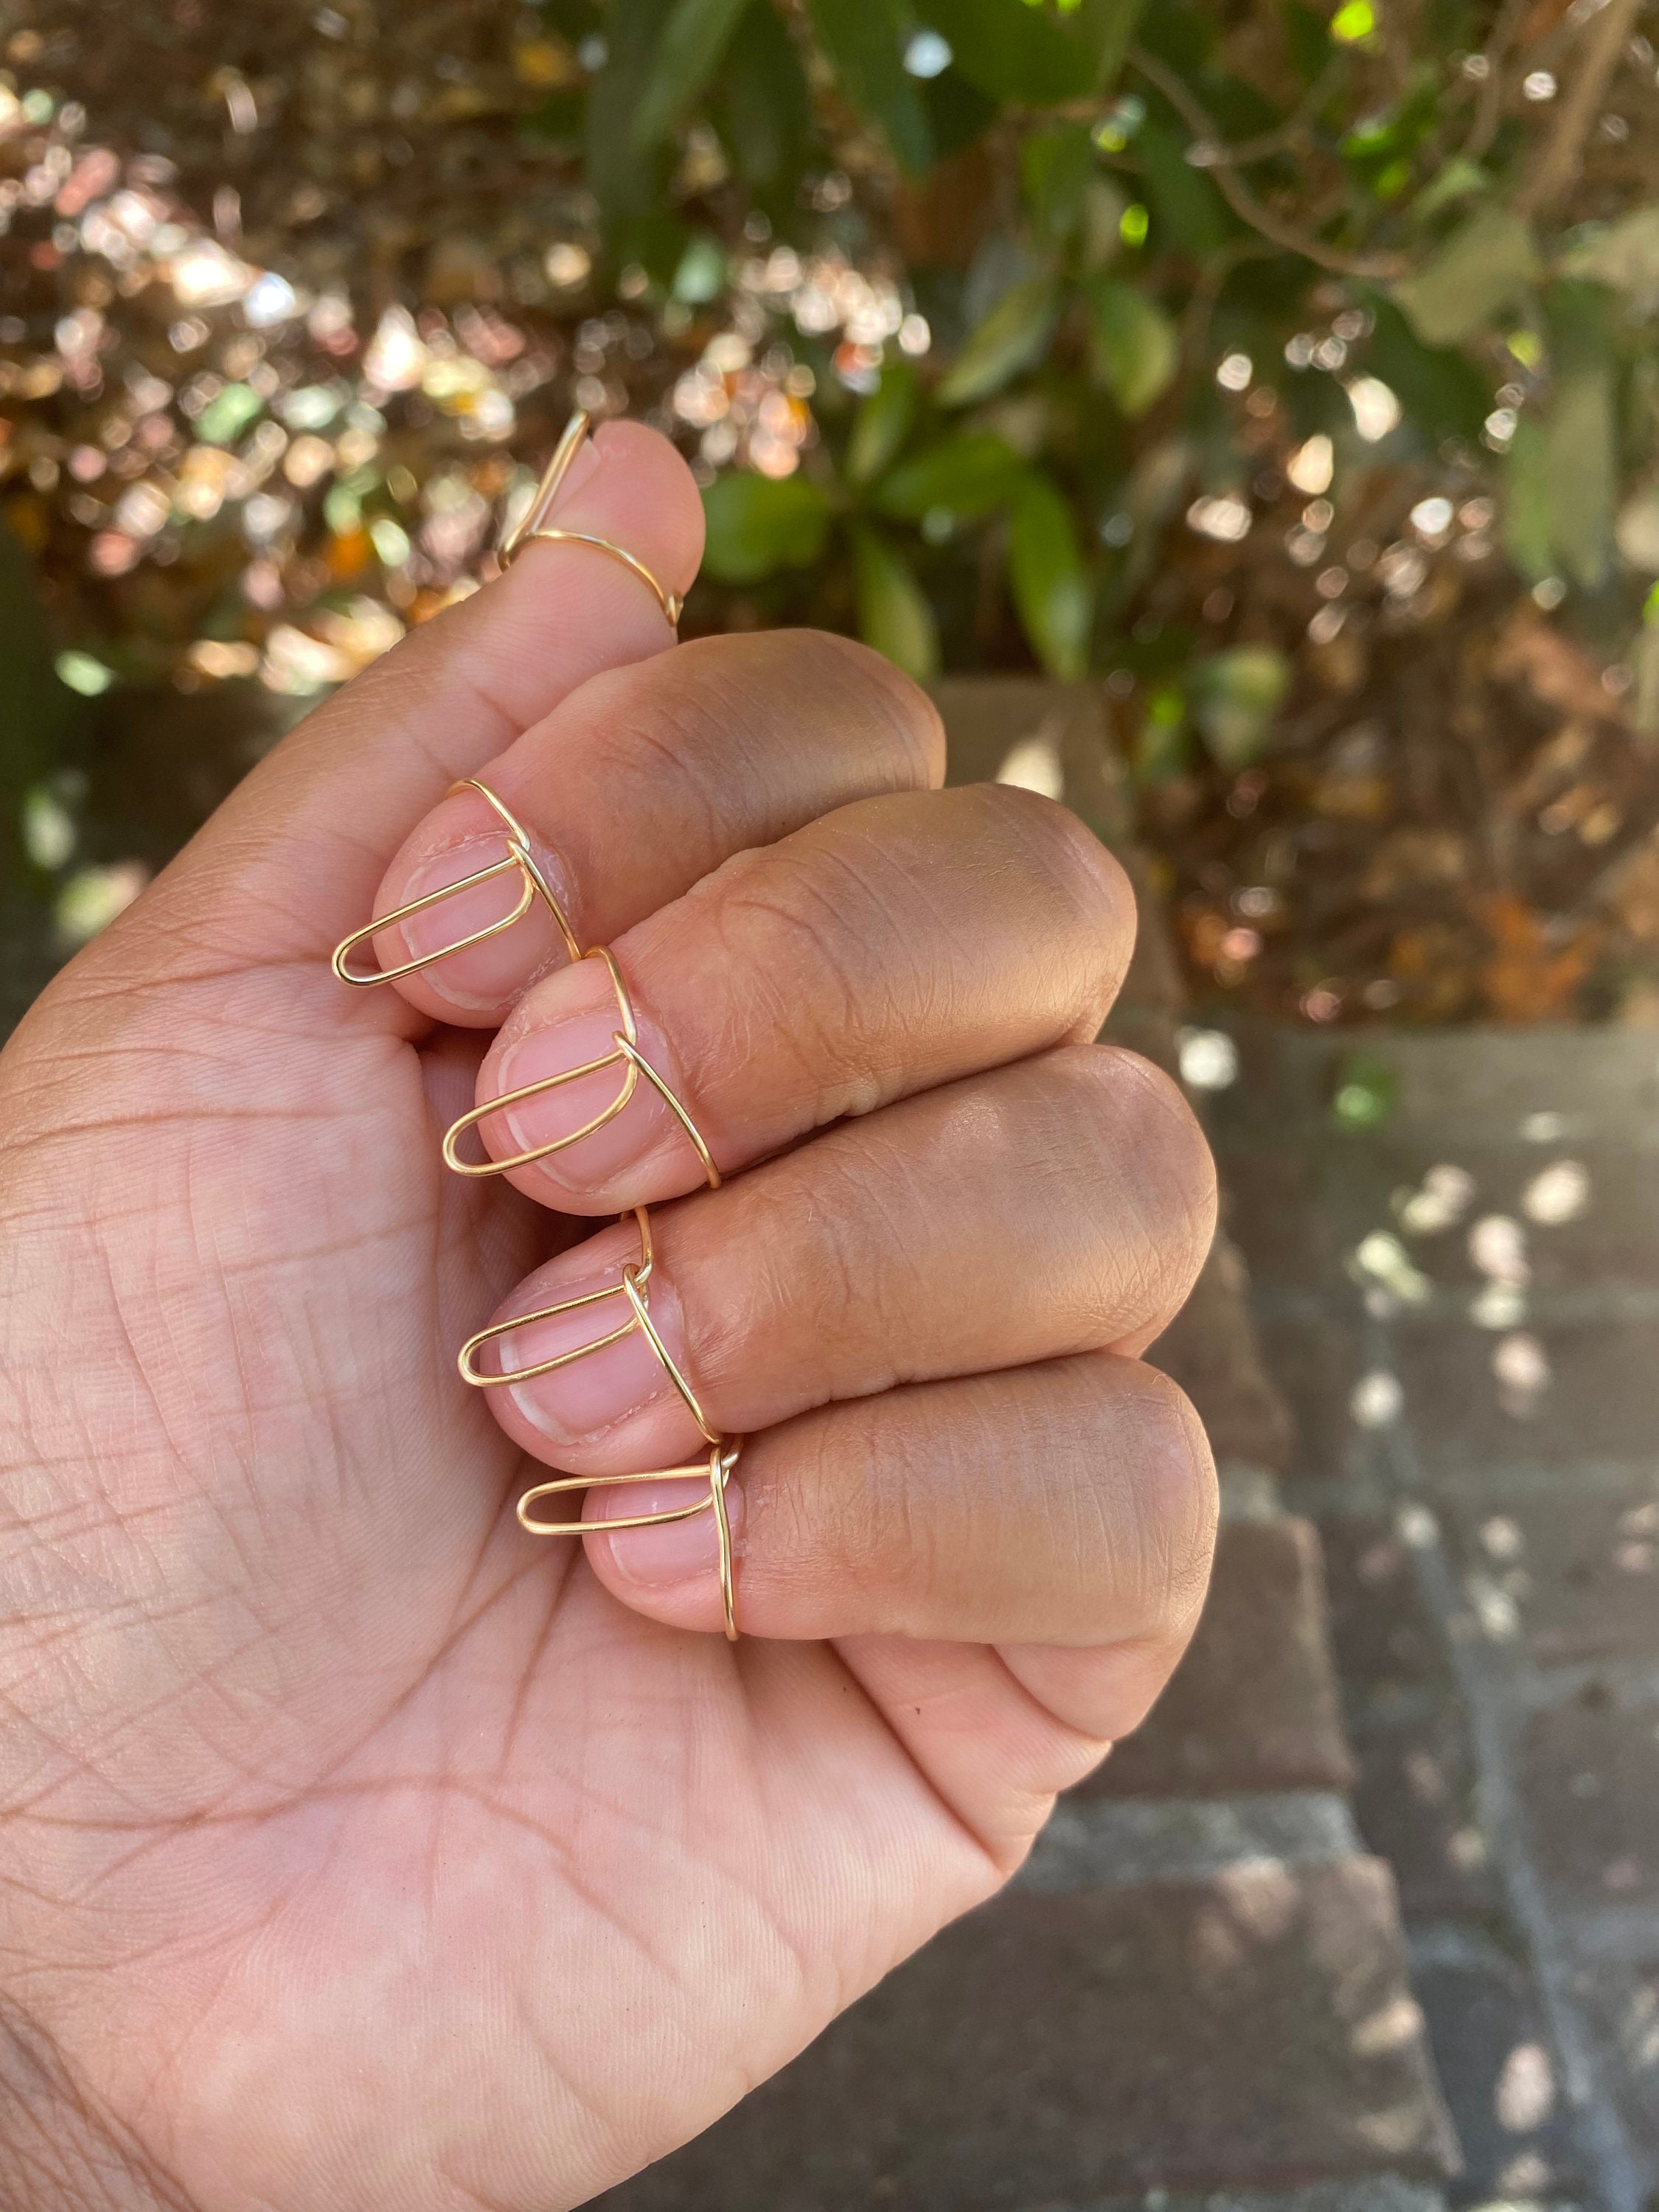 38 Rose Gold Nail Designs To Show Your Manicurist